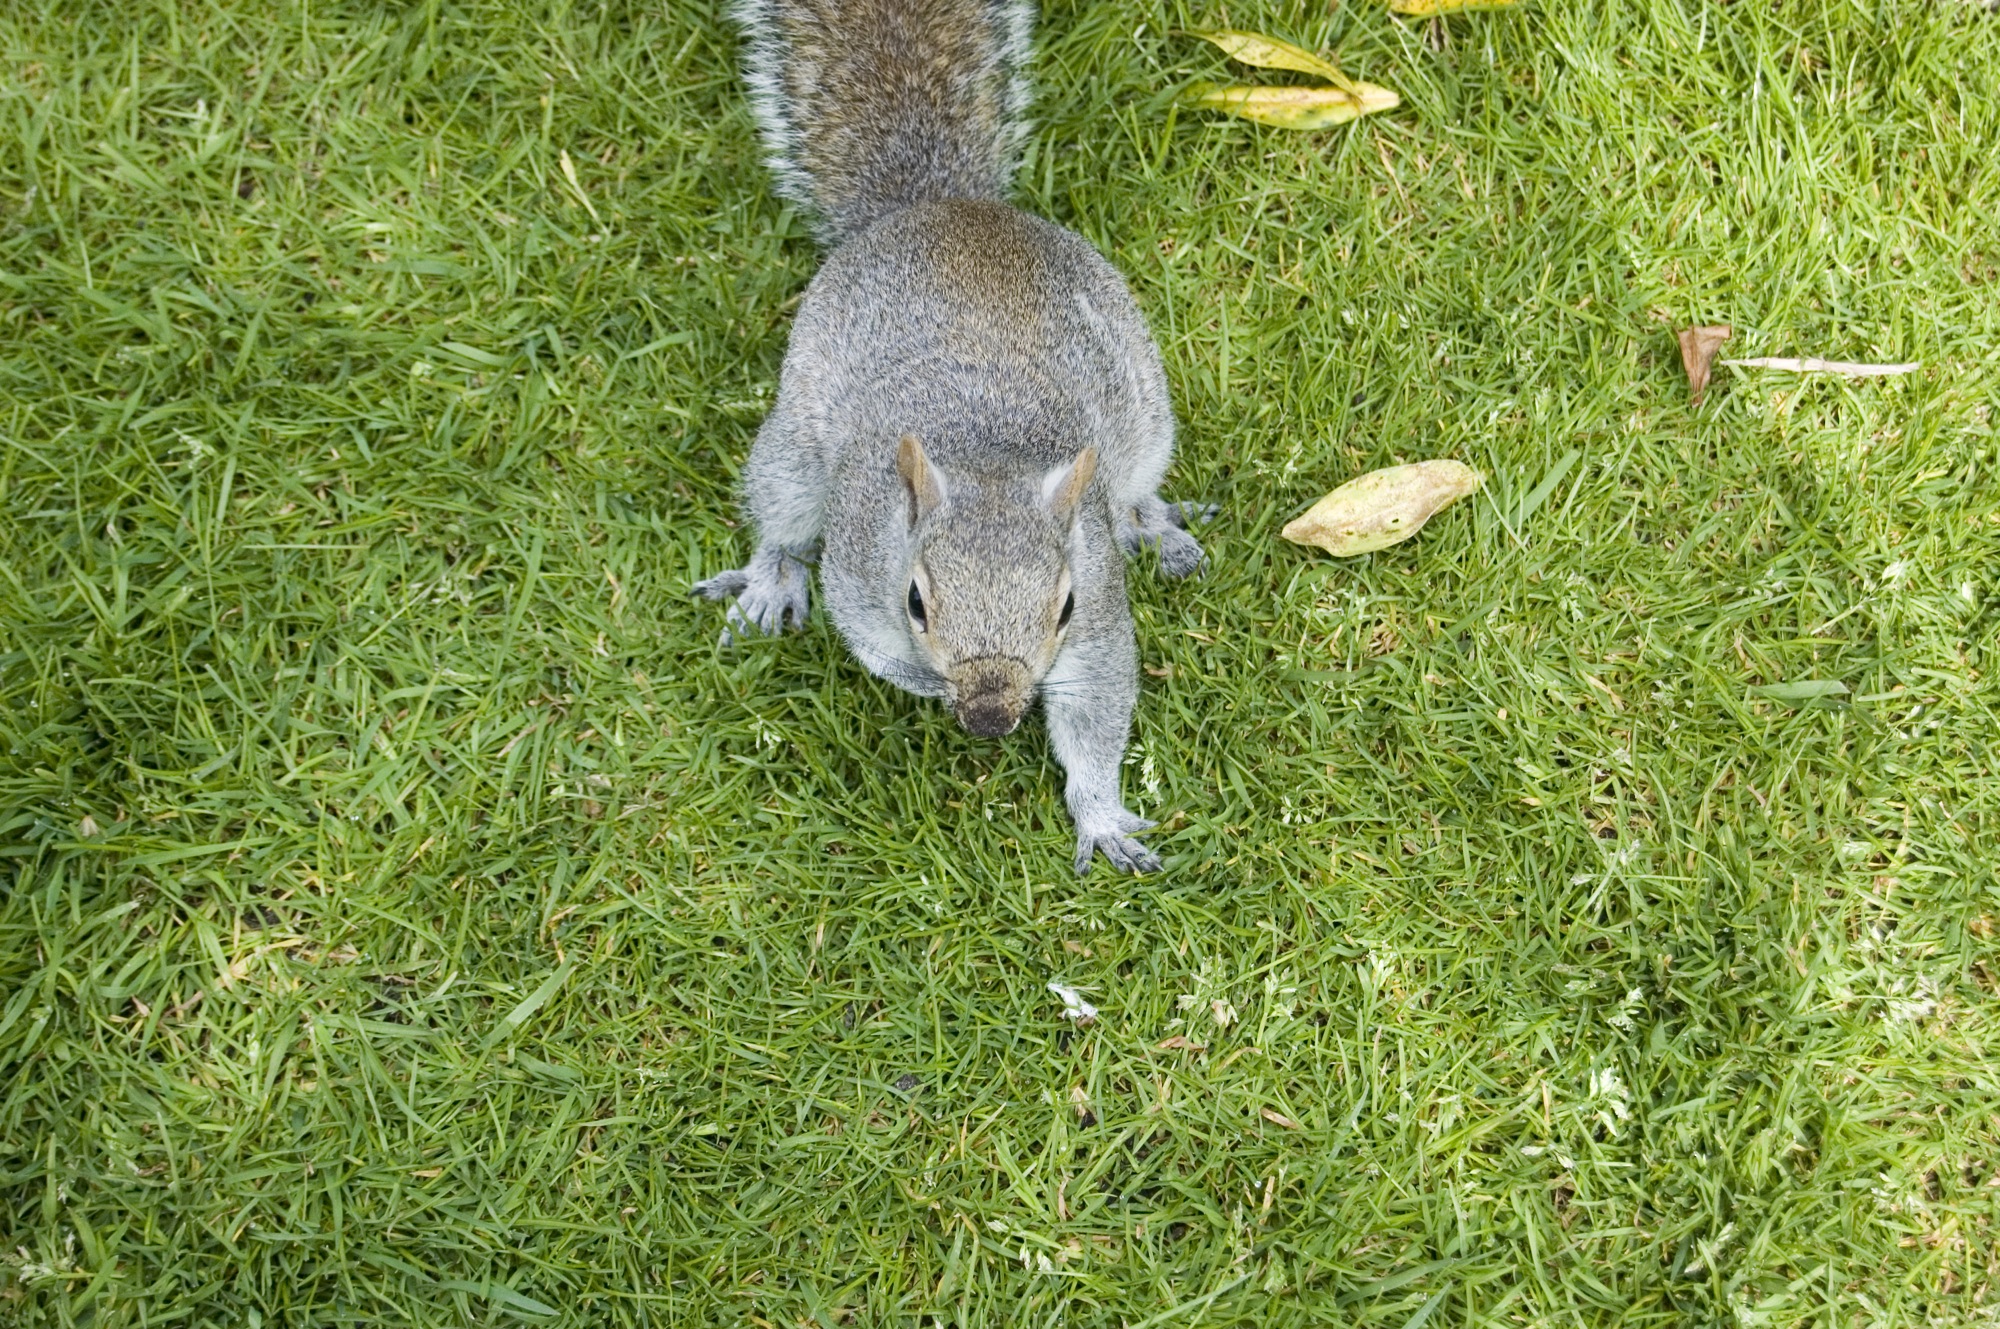 a grey squirrel eating a banana on the ground